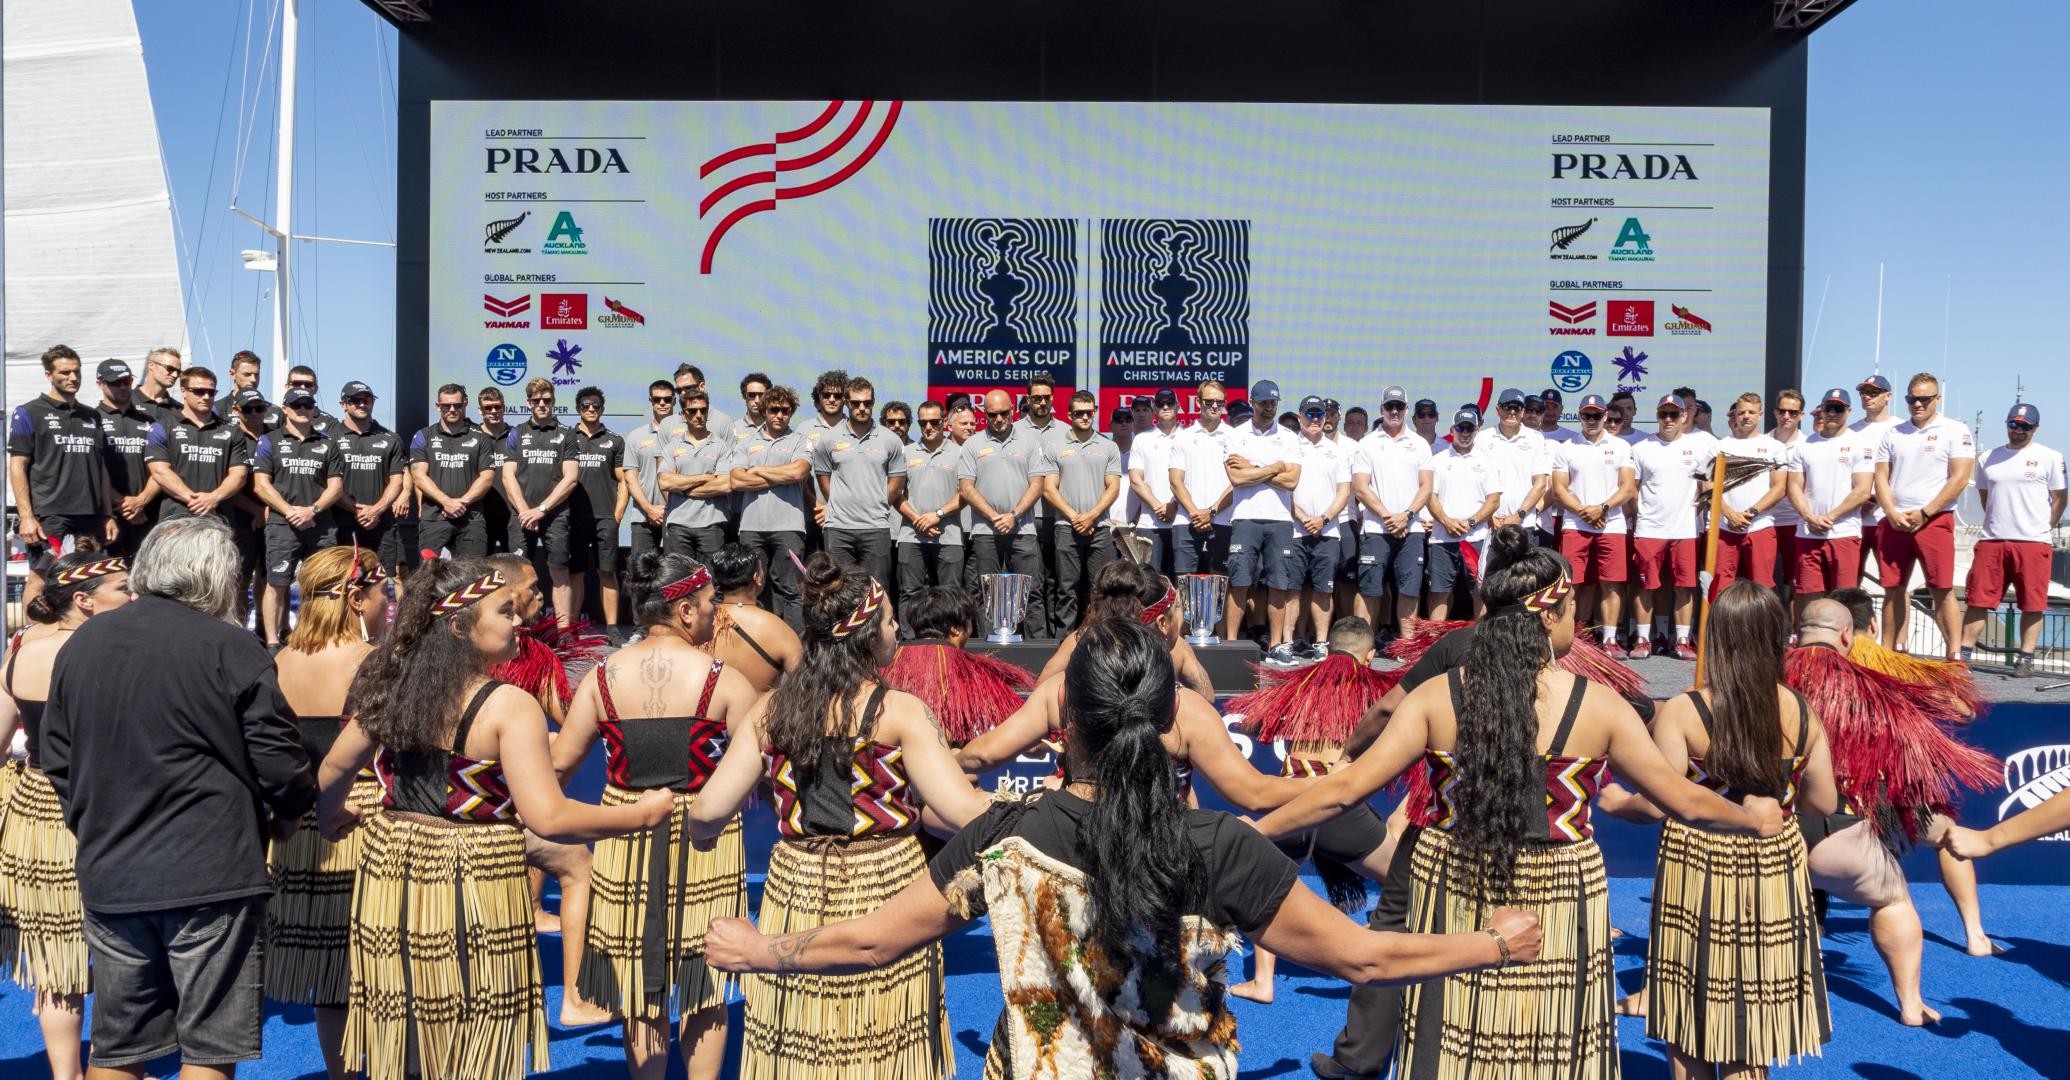 The America’s Cup Race Village is open